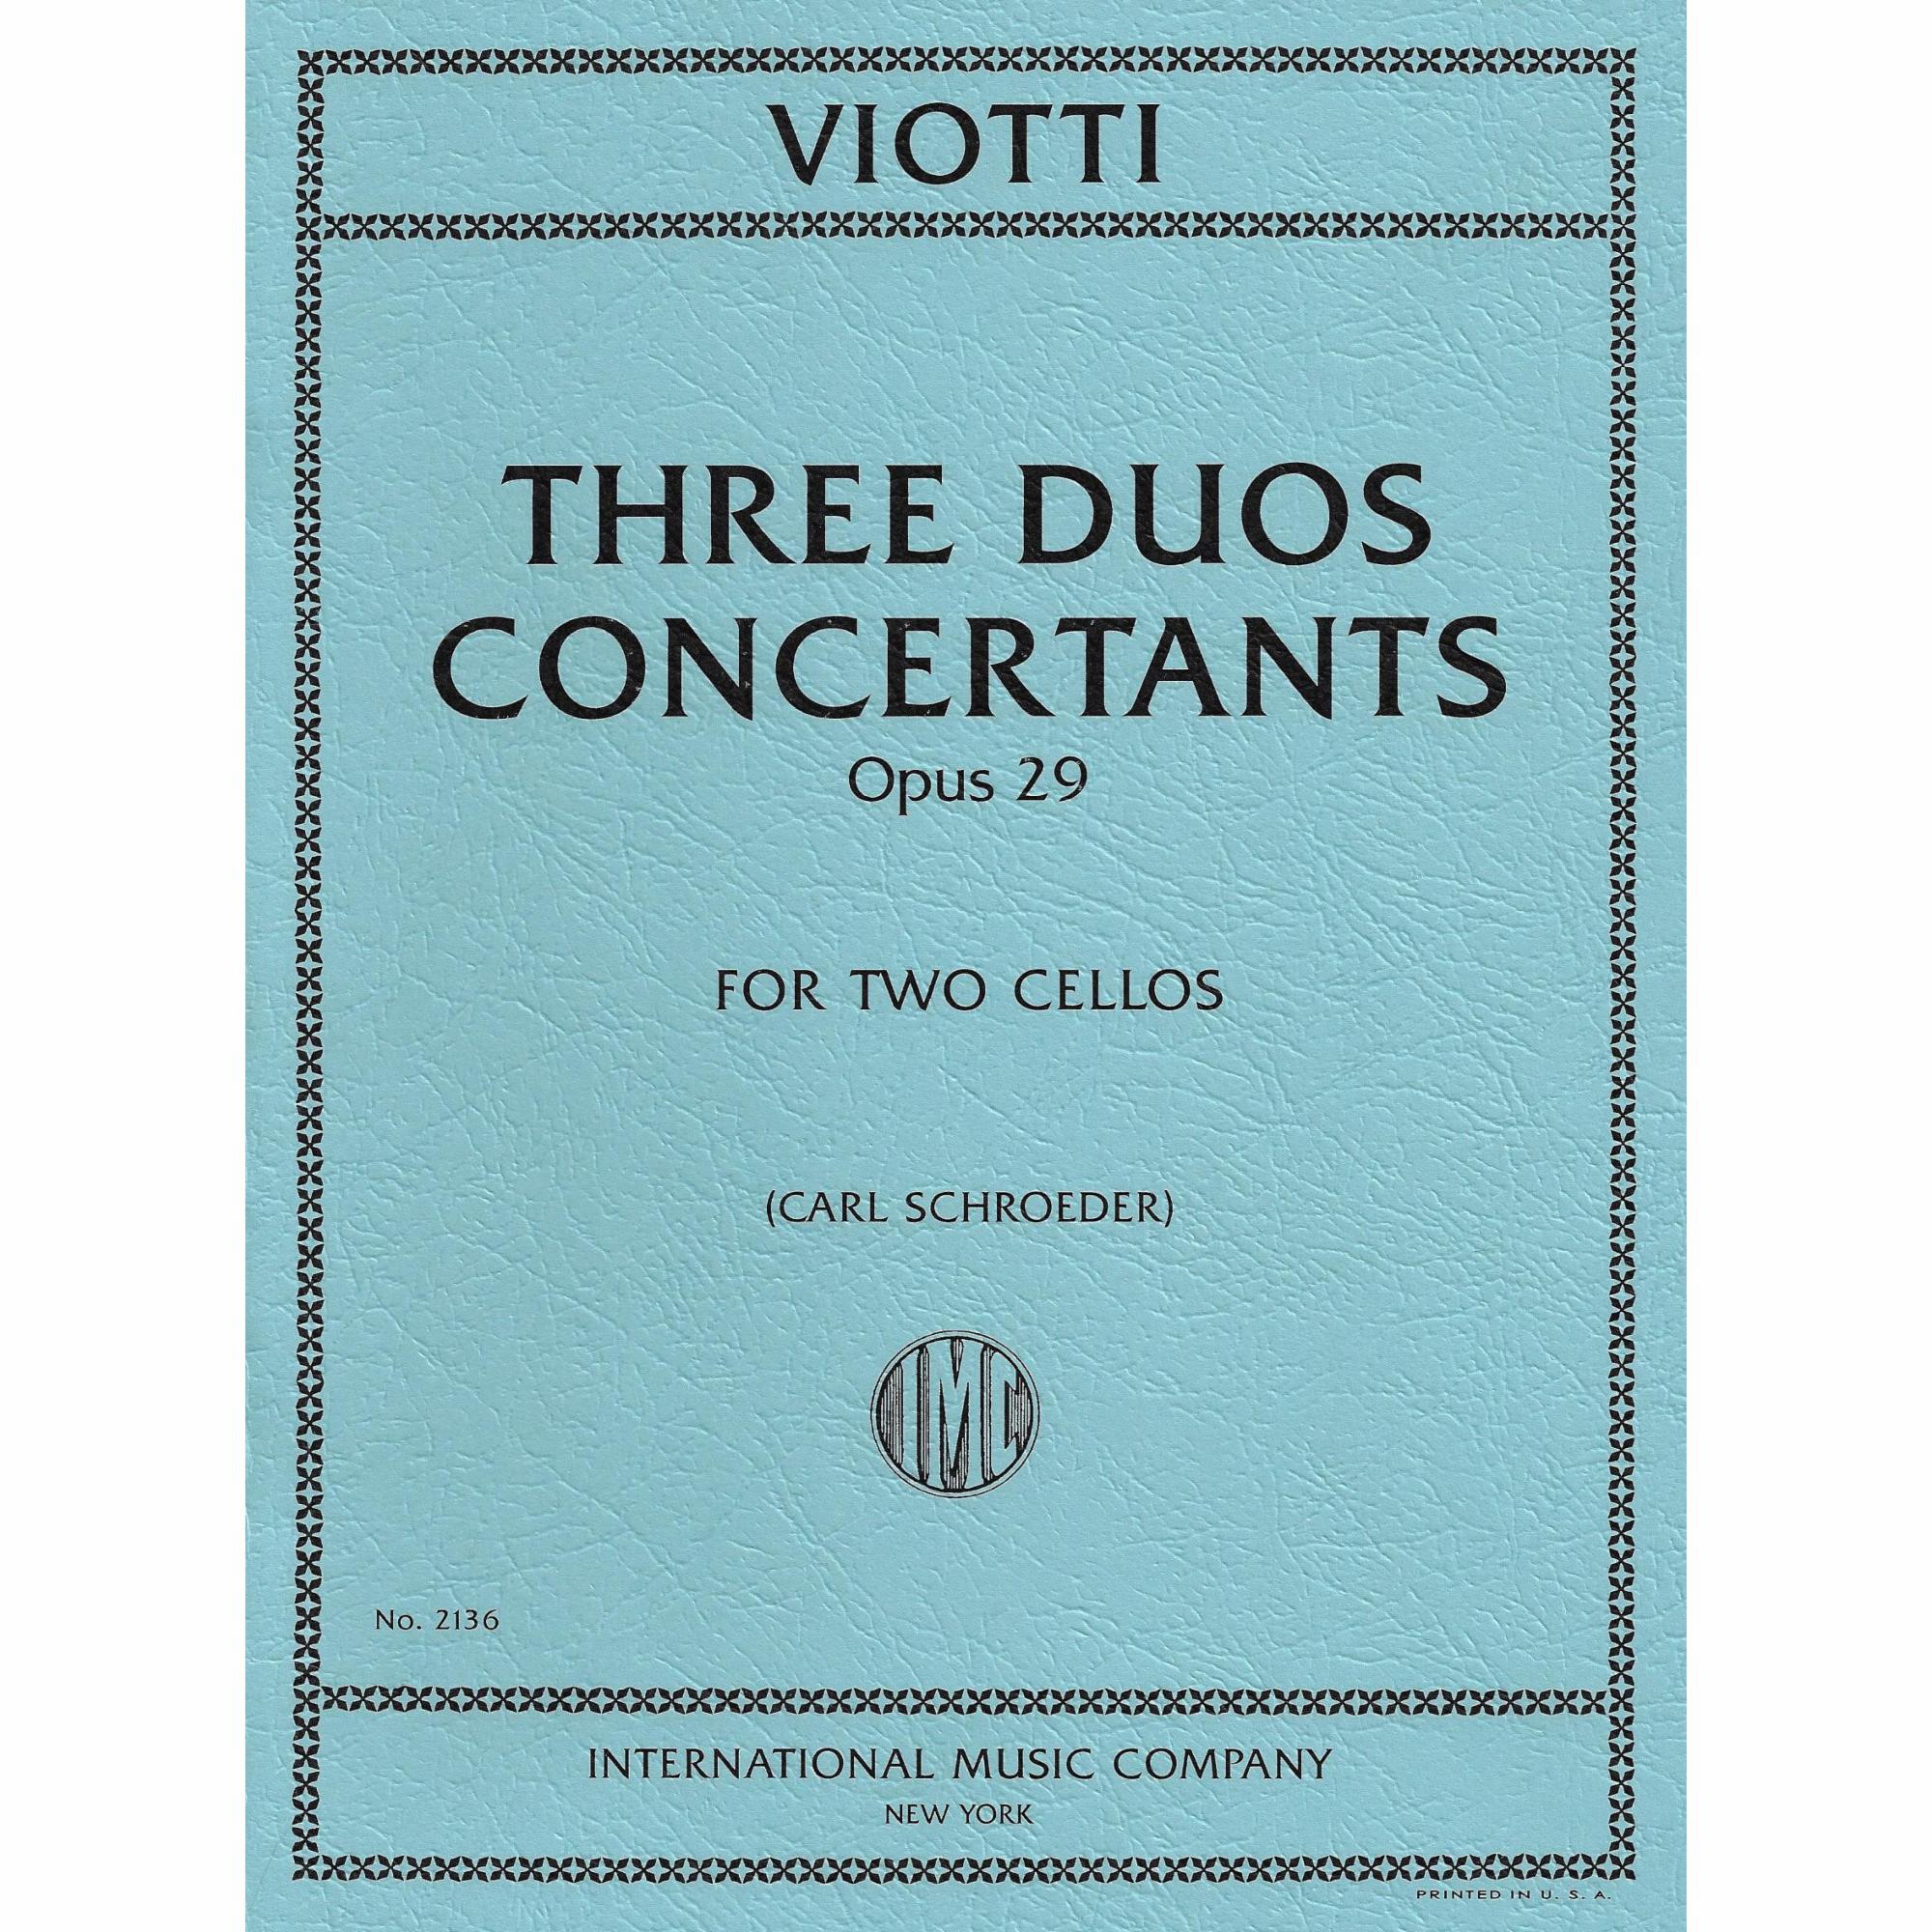 Viotti -- Three Duos Concertants, Op. 29 for Two Cellos